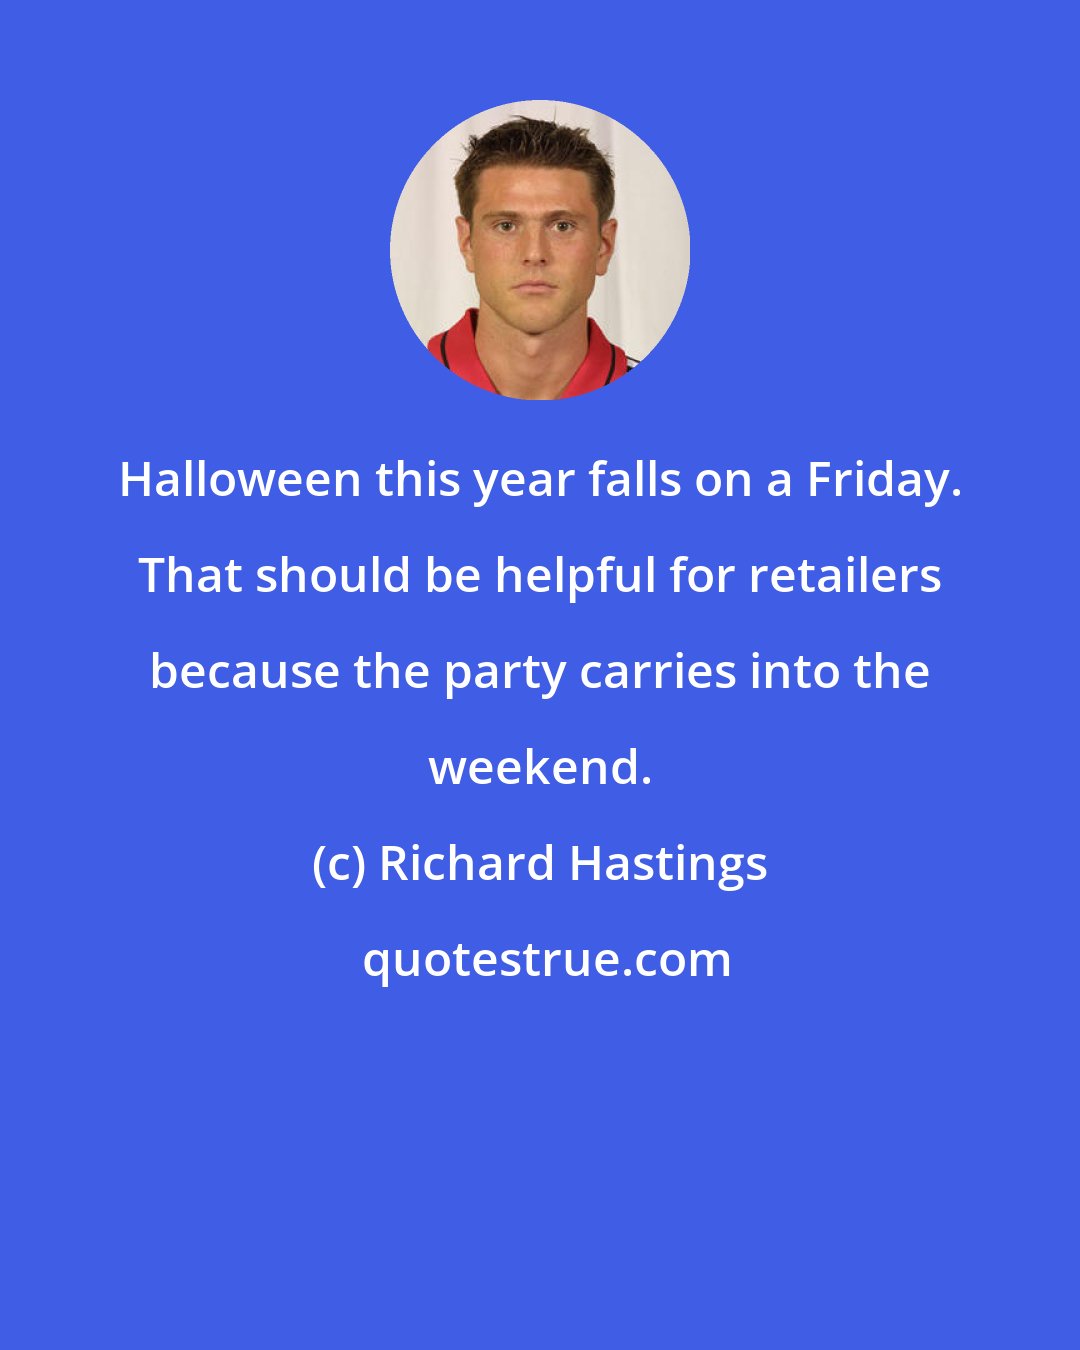 Richard Hastings: Halloween this year falls on a Friday. That should be helpful for retailers because the party carries into the weekend.